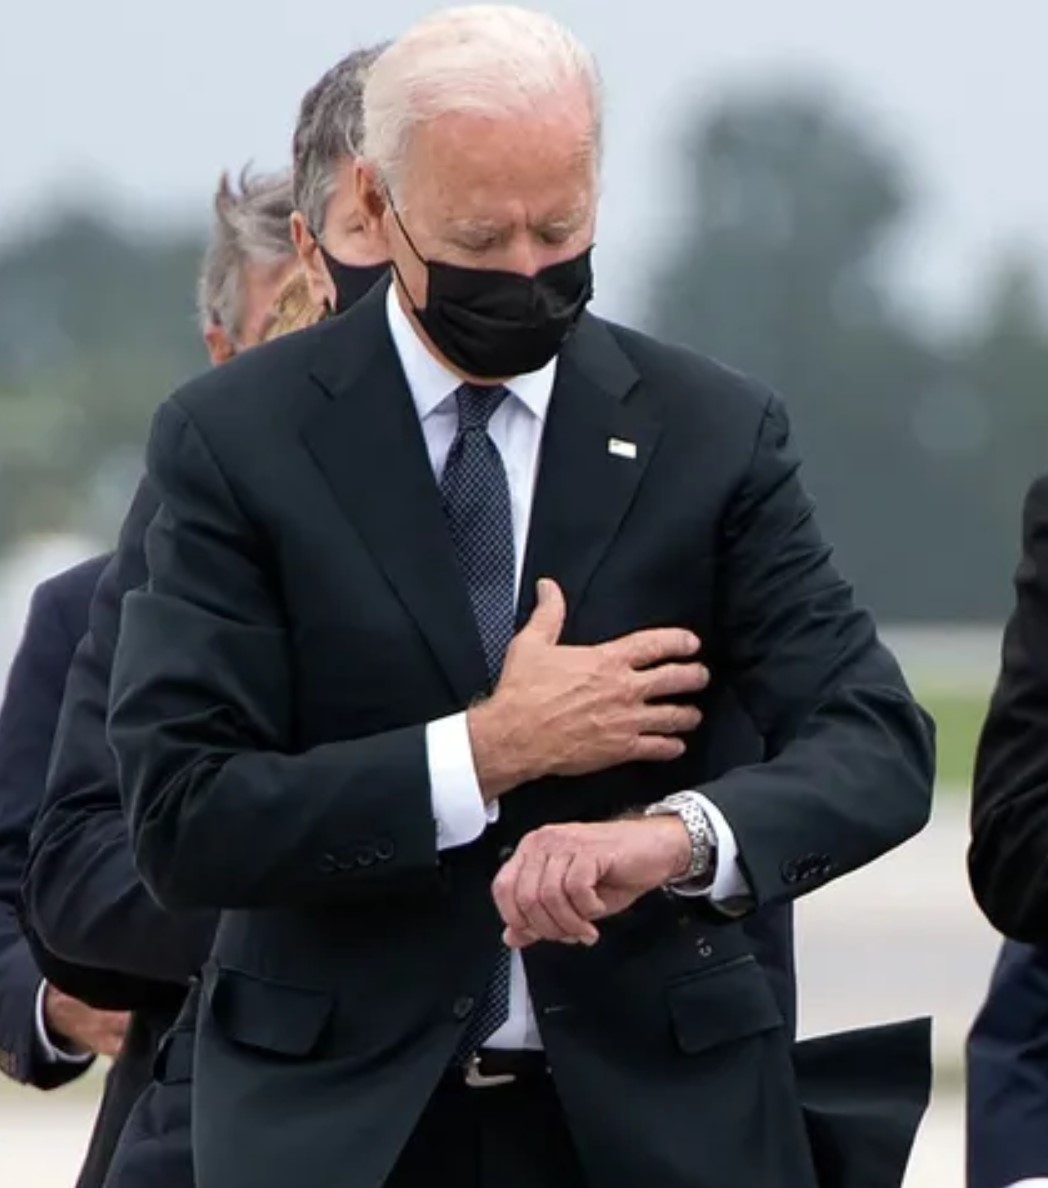 Jen Psaki Busted in Lie, Removes Passage from Her New Book In her new book “Say More,” former White House Press Secretary Jen Psaki wrote that Biden “looked at his watch only after the ceremony had ended. Moments later, he and the First Lady headed toward their car.” Even